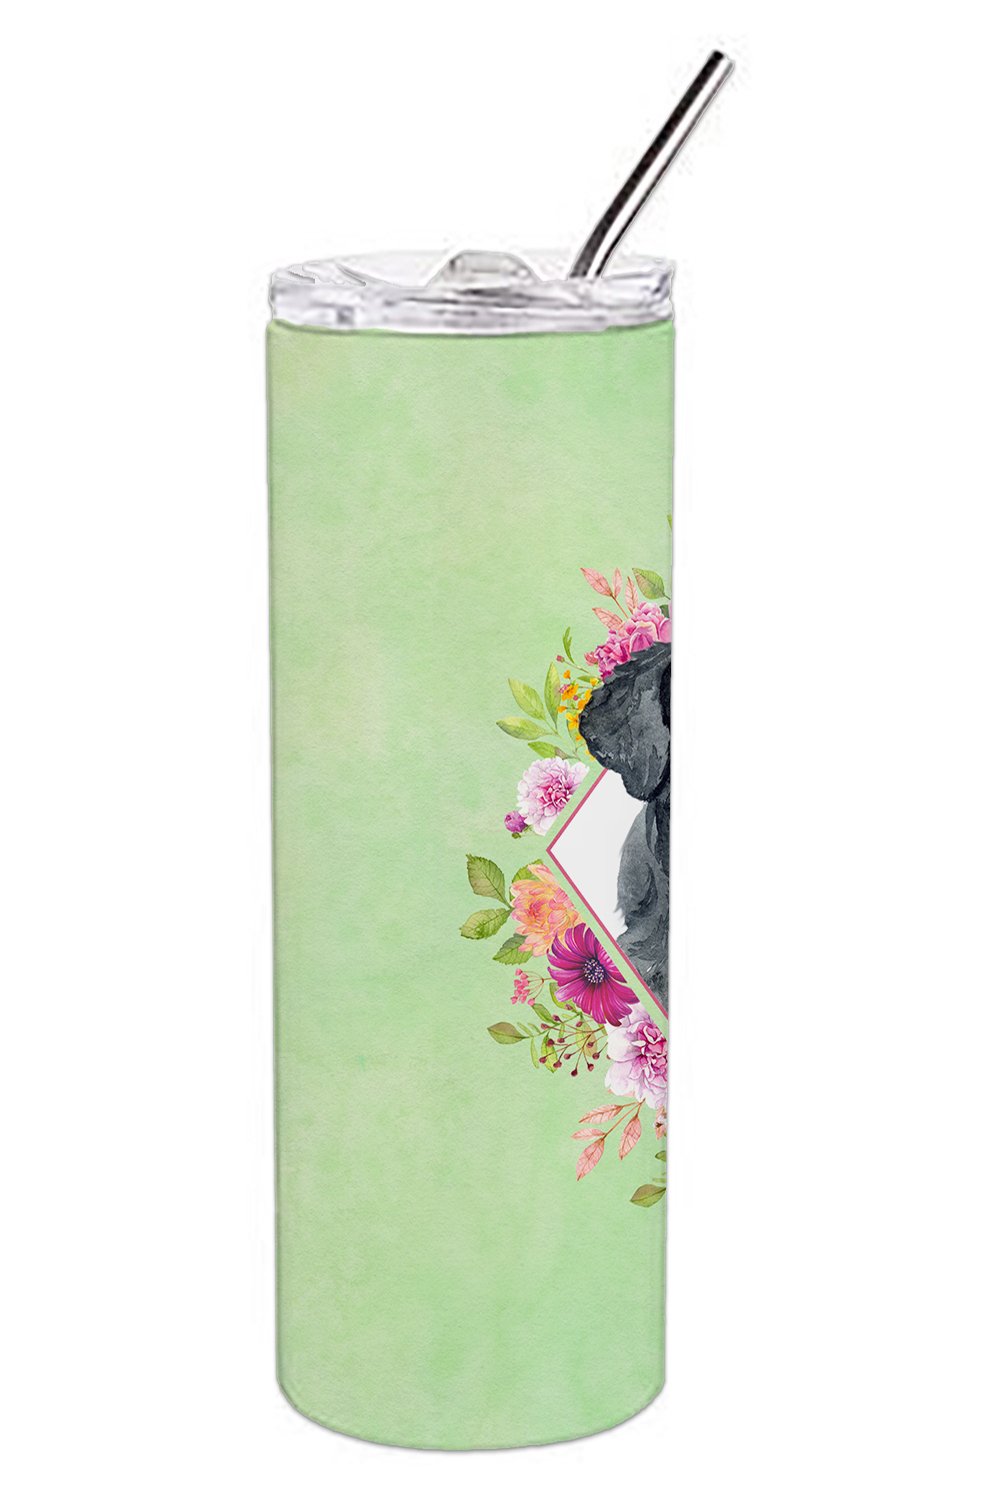 Giant Schnauzer Green Flowers Double Walled Stainless Steel 20 oz Skinny Tumbler CK4338TBL20 by Caroline's Treasures